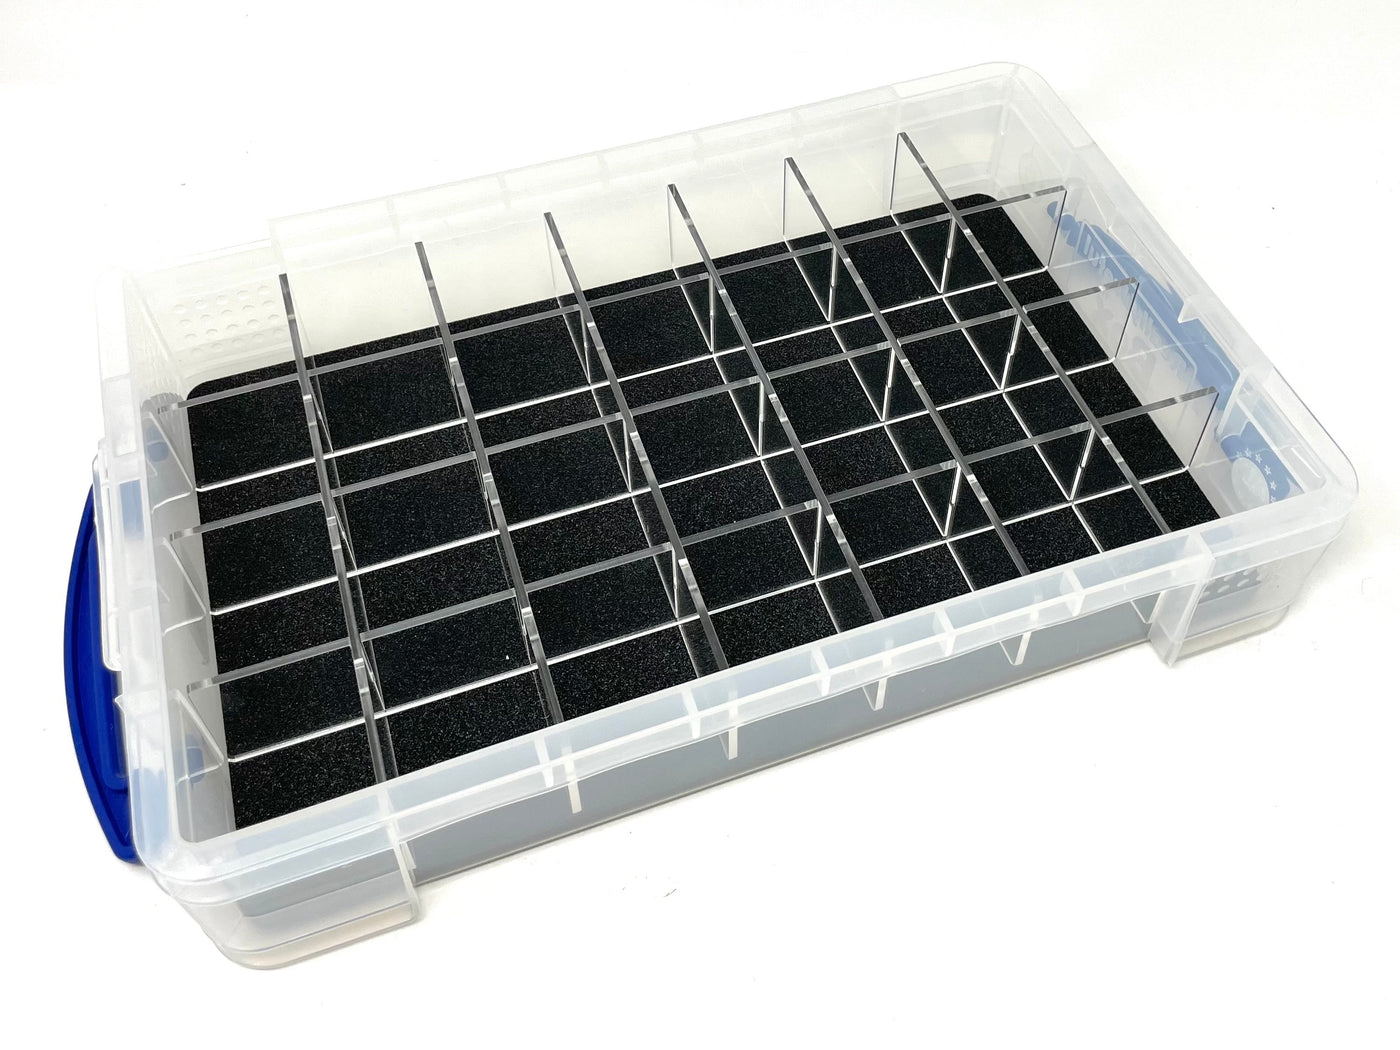 Acrylic dividers for UK 4L Really useful box (not included) *Does not fit the US 4L box*